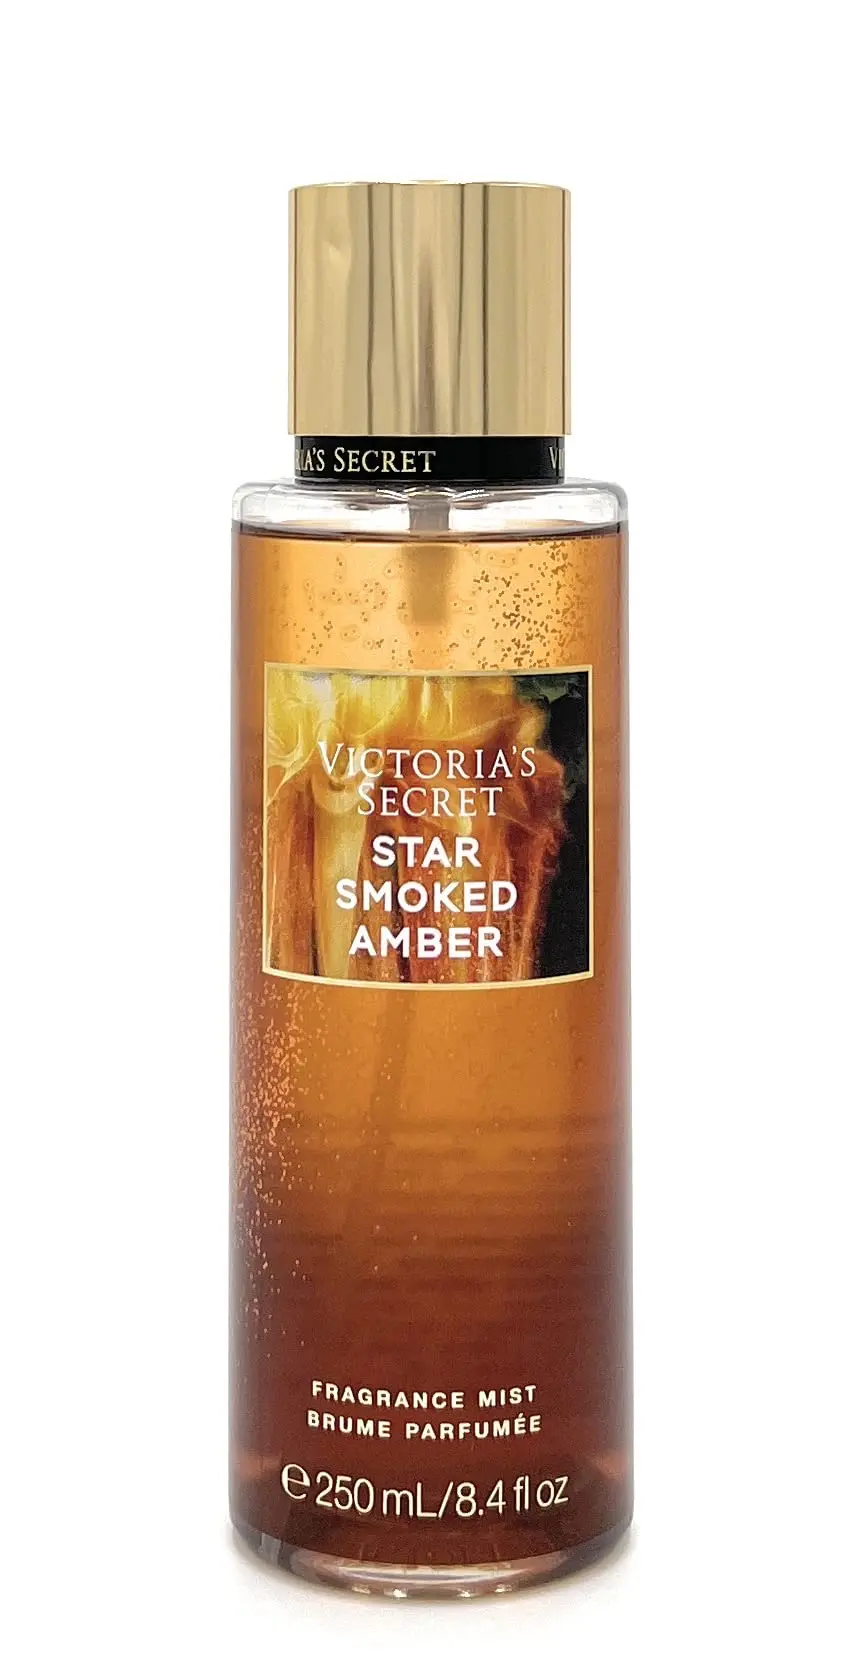 star smoked amber victoria's secret - What does star smoked amber smell like